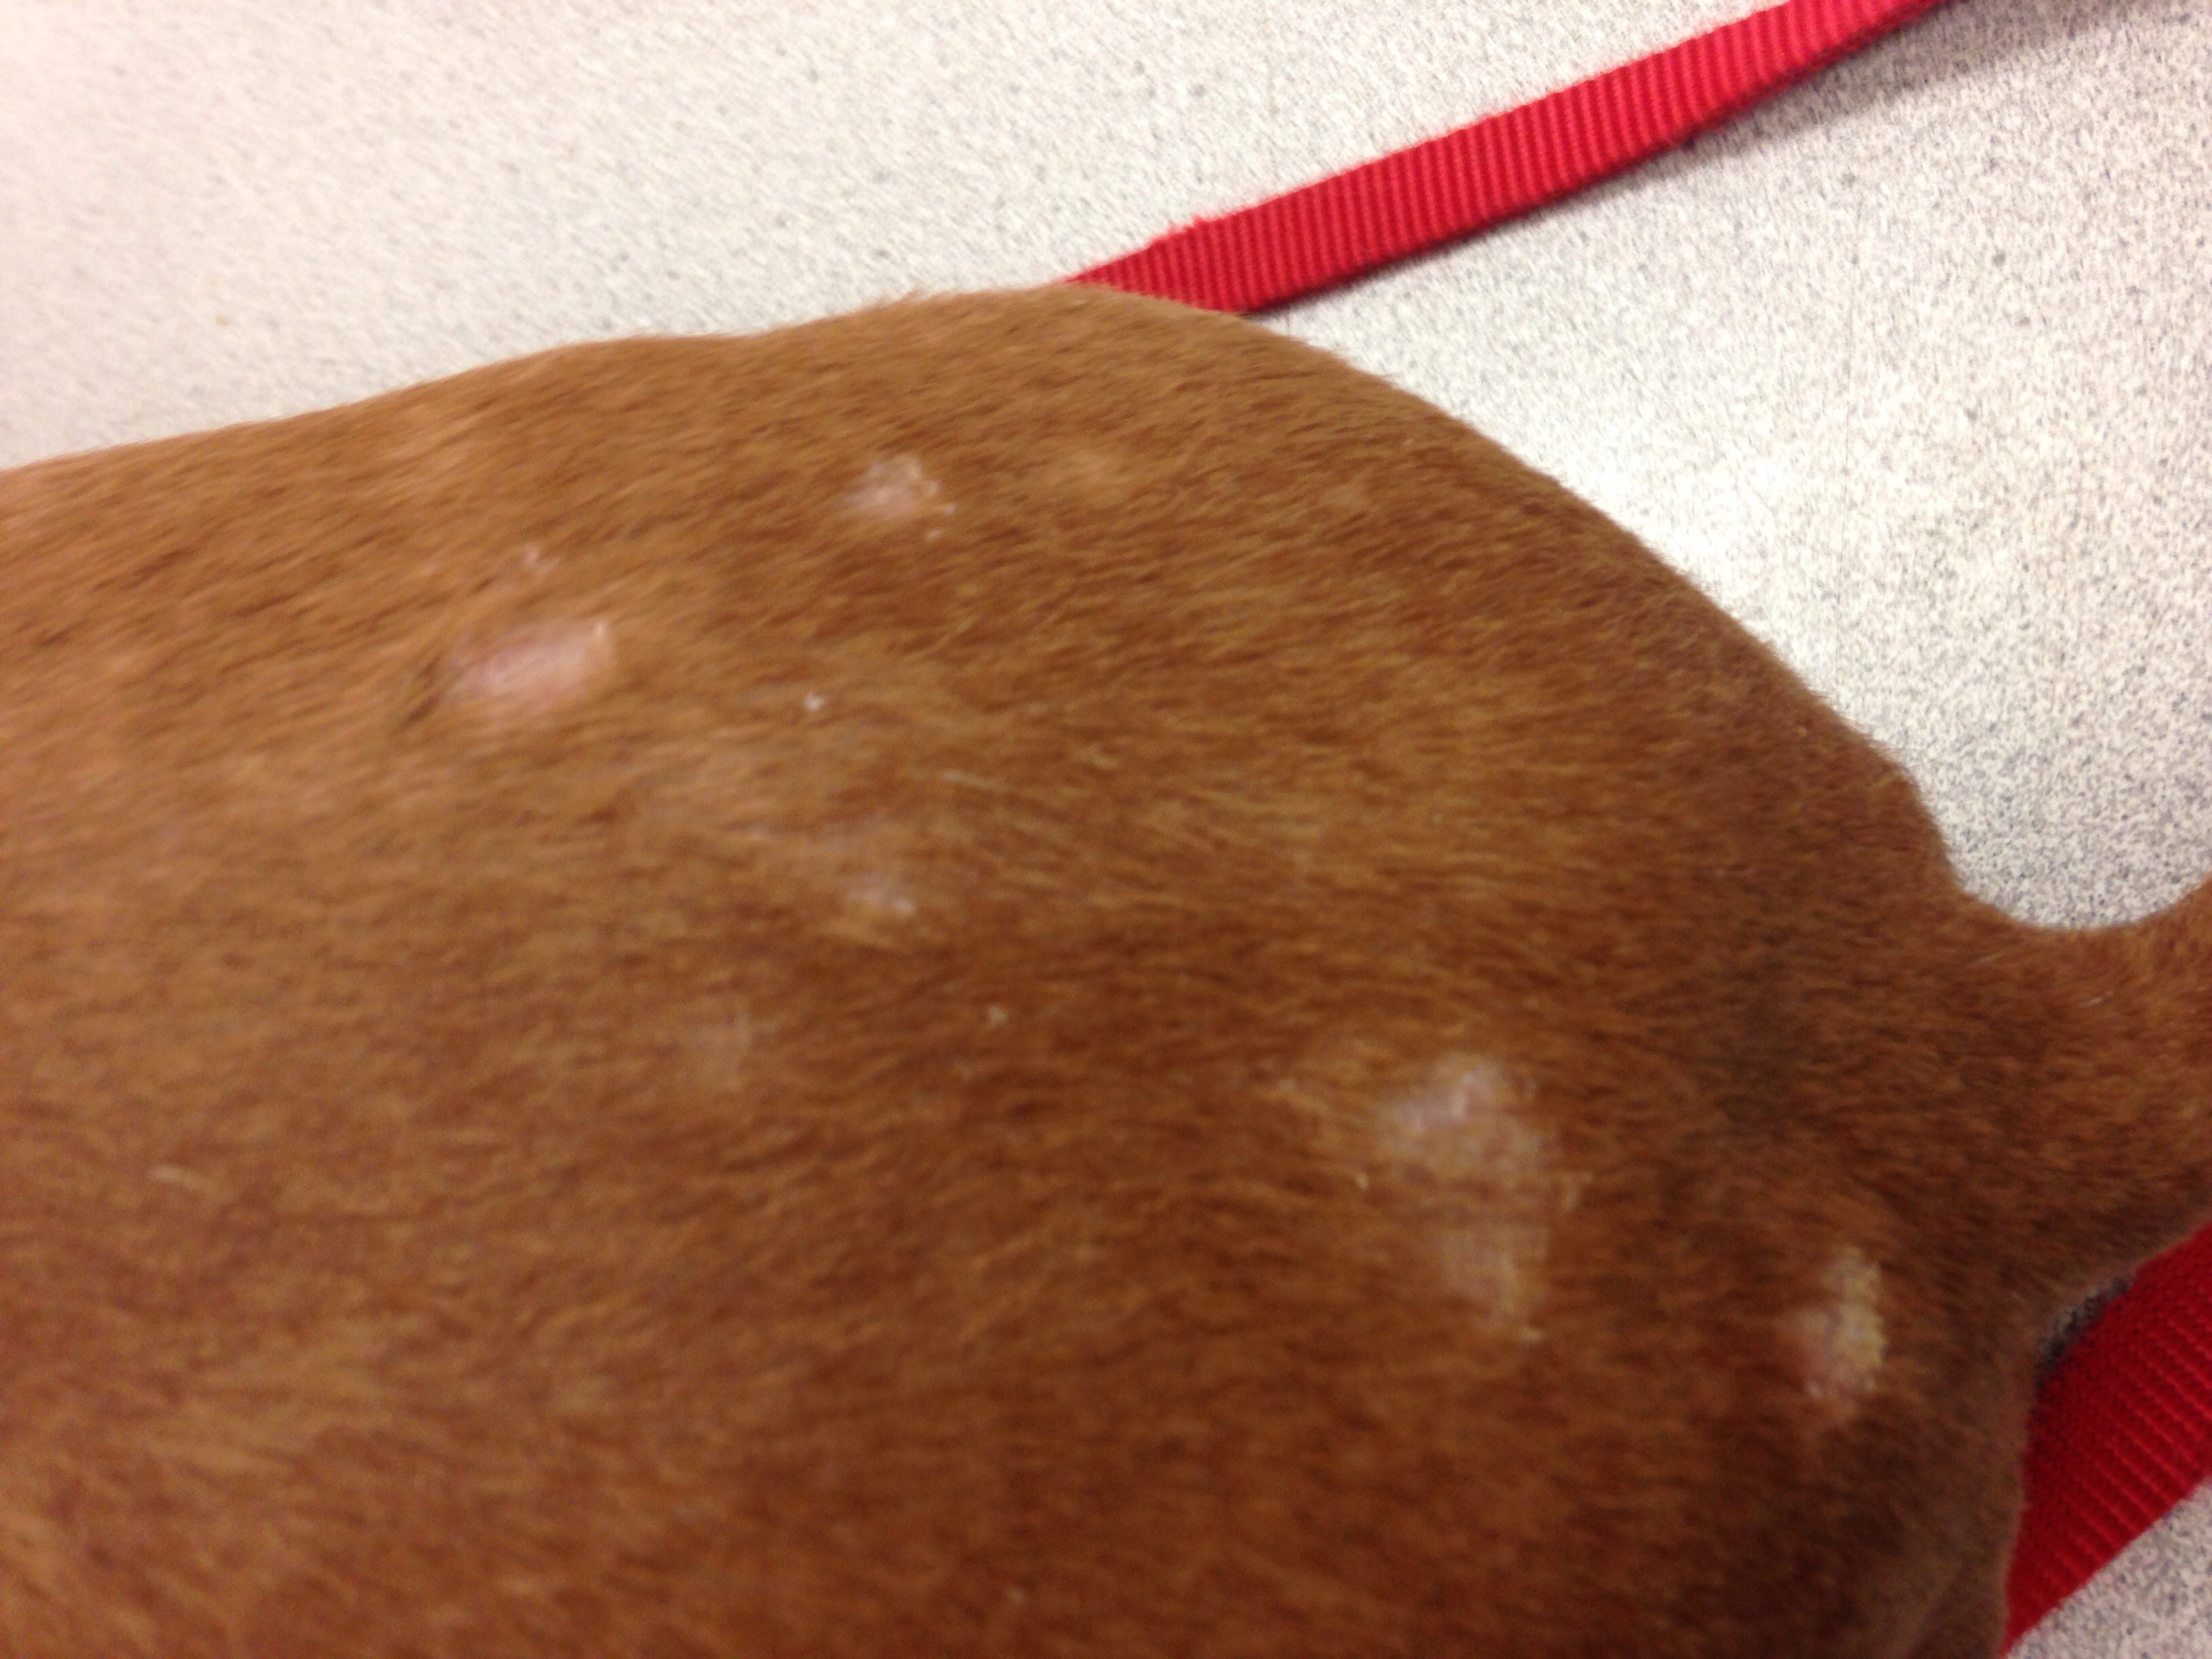 Light Patches On Dogs Nose Is Dry And Crusty